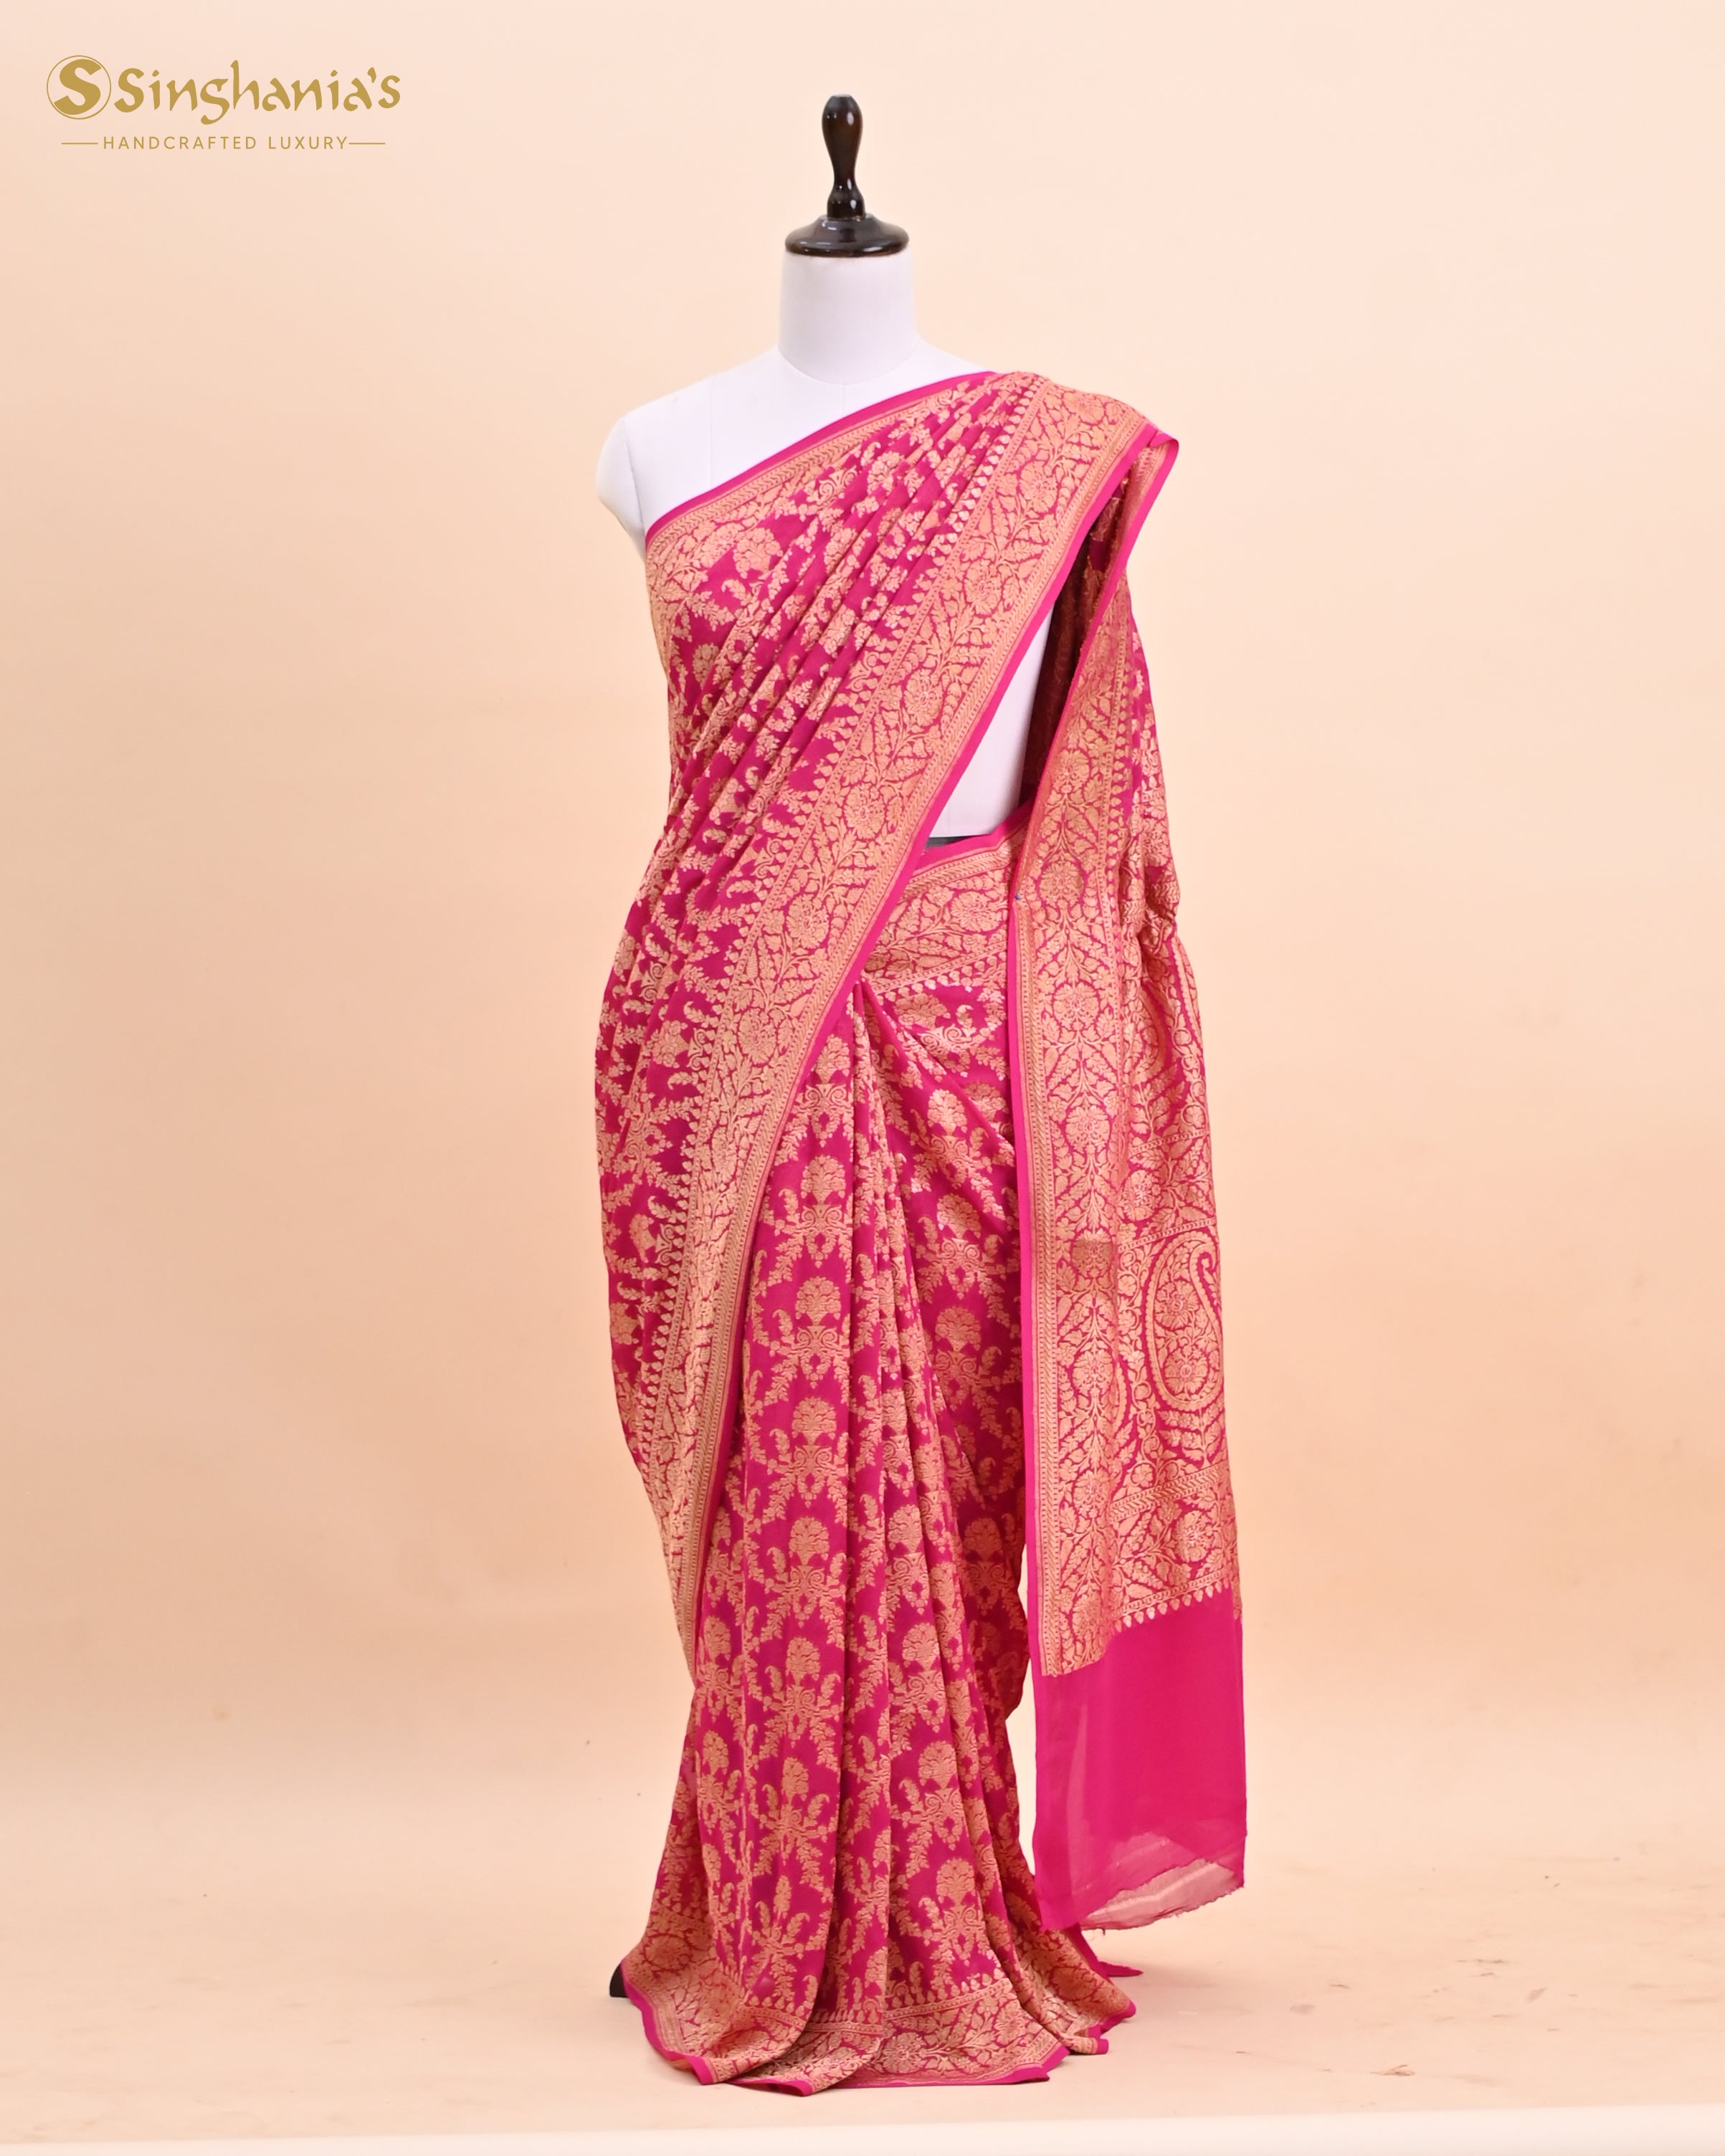 How to Wear a Saree? Step-by-Step Guide to Draping A Saree